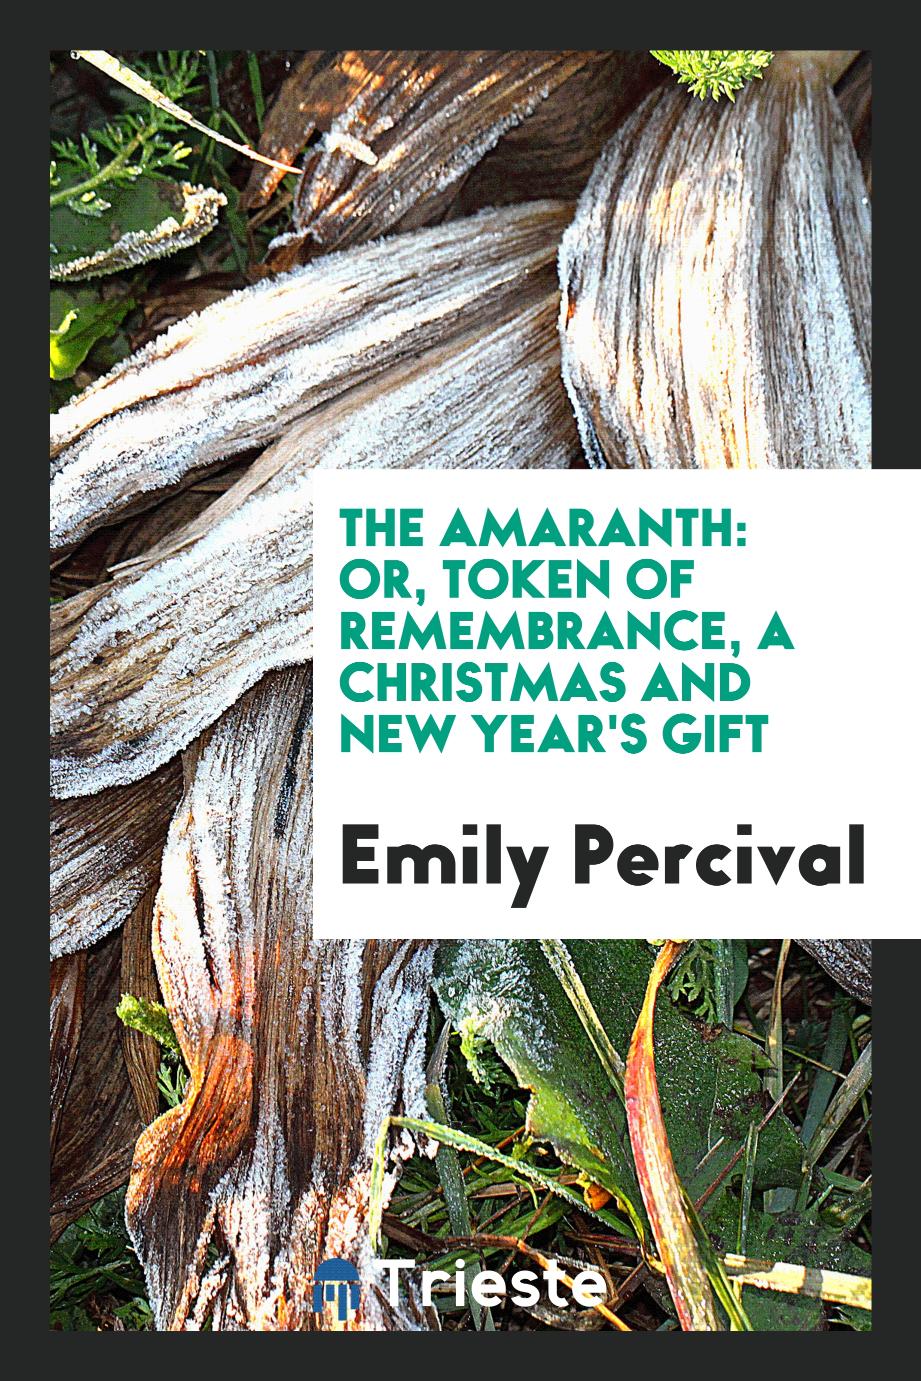 The Amaranth: or, Token of remembrance, a Christmas and New Year's gift